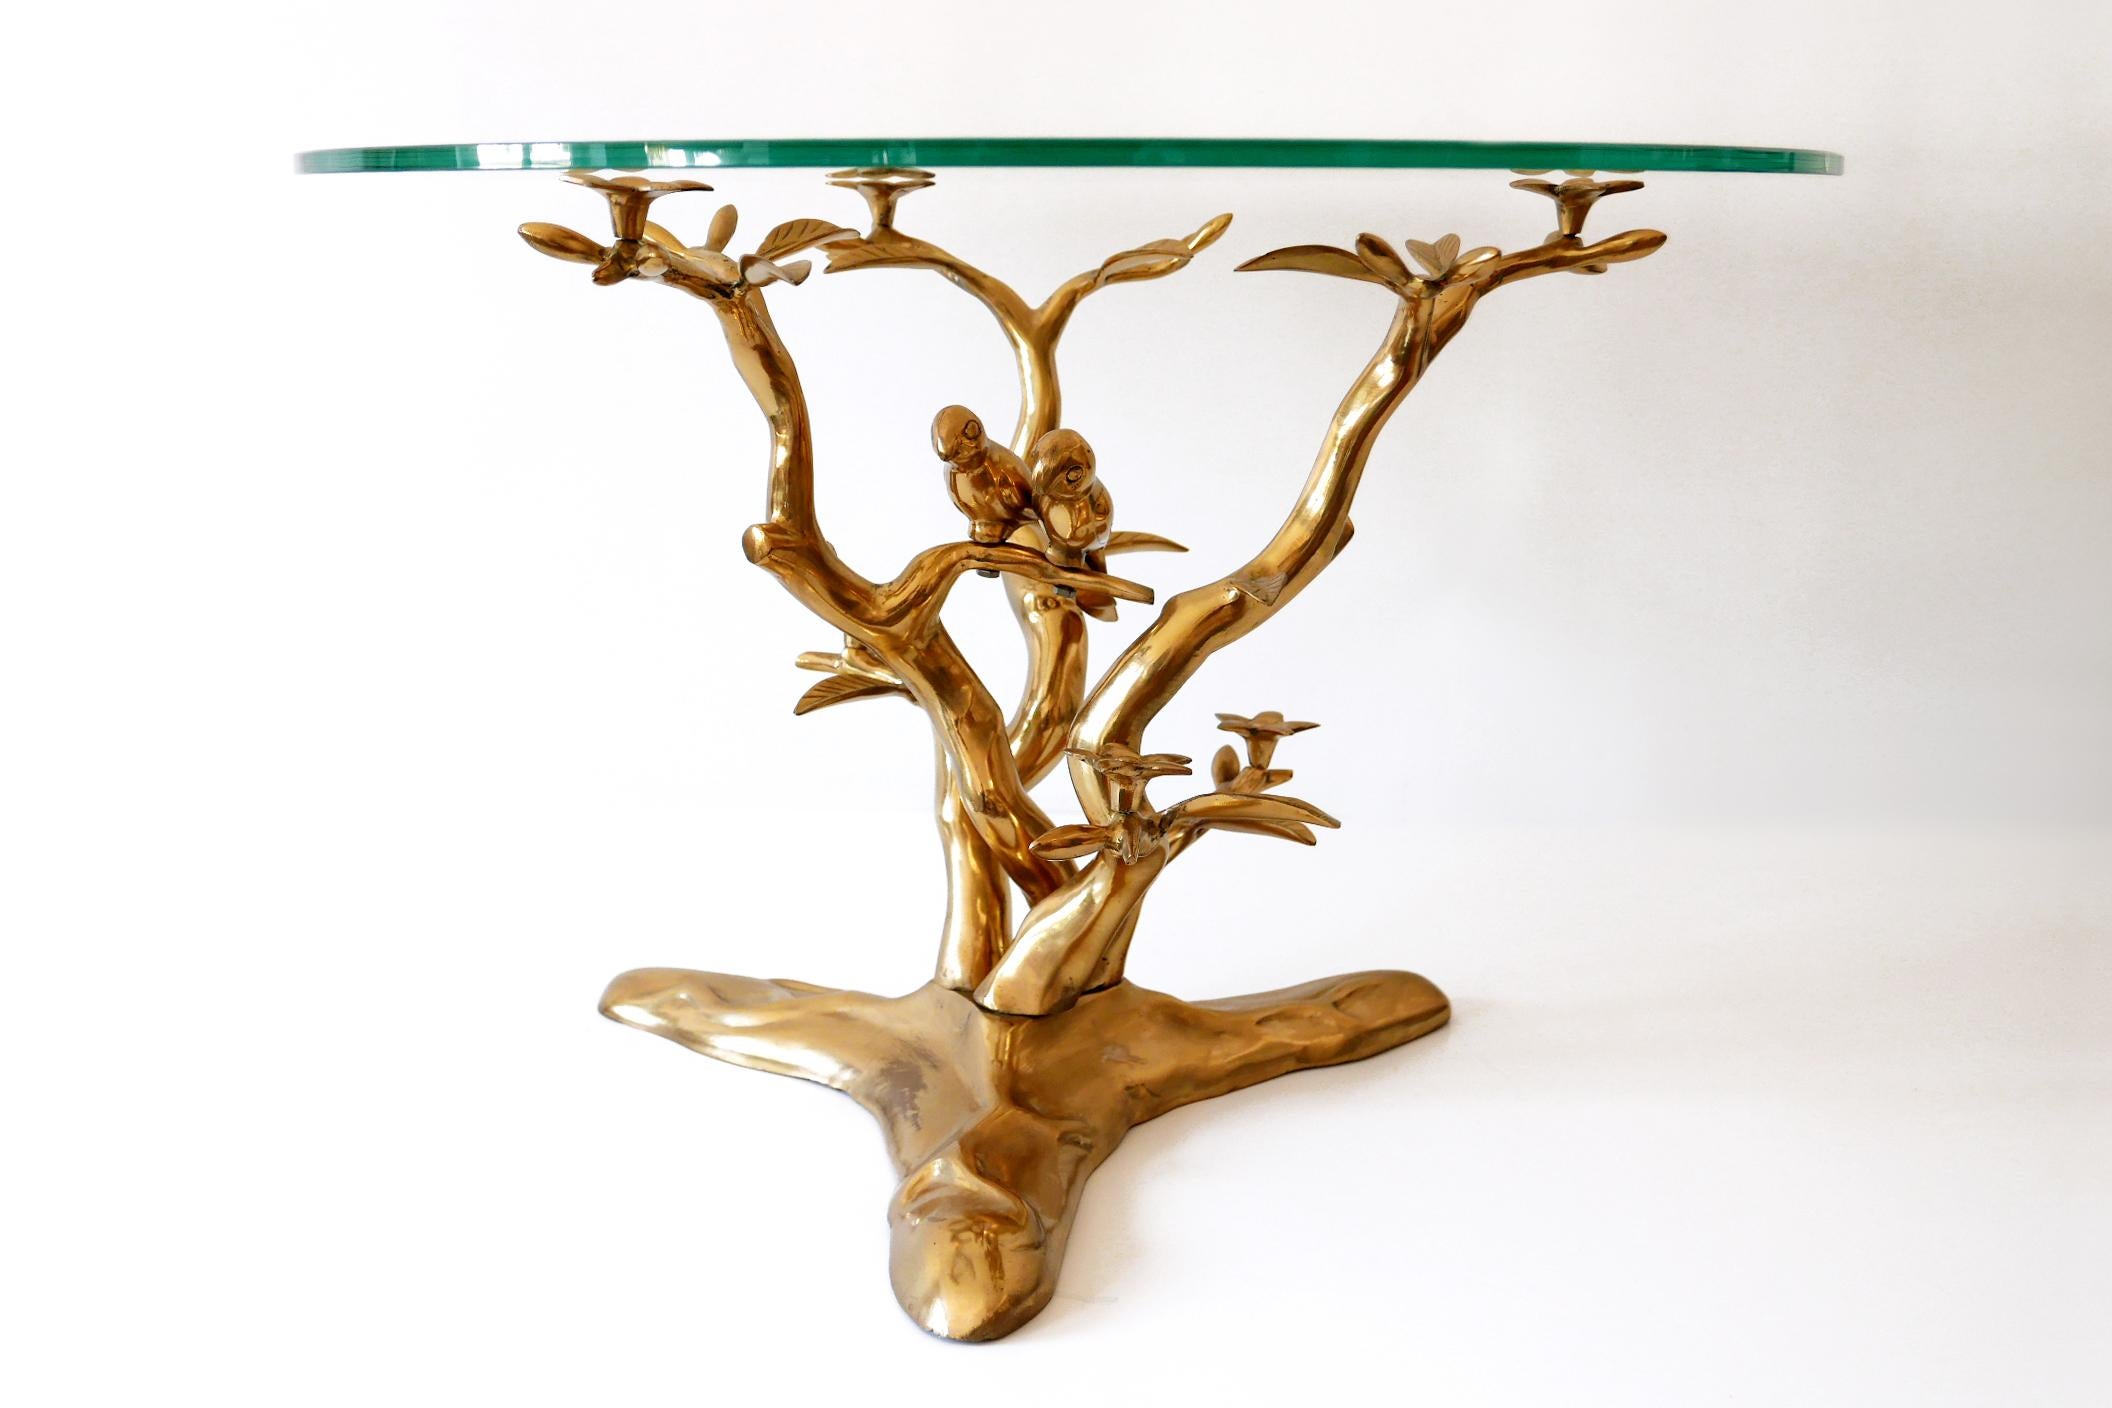 Very beautiful and highly decorative Mid-Century Modern coffee table with a massiv brass base in form of tree with two loving birds. Designed by Willy Daro, Belgium, 1970s.

Executed in massiv brass base and clear glass top.

Dimensions: 
Dm